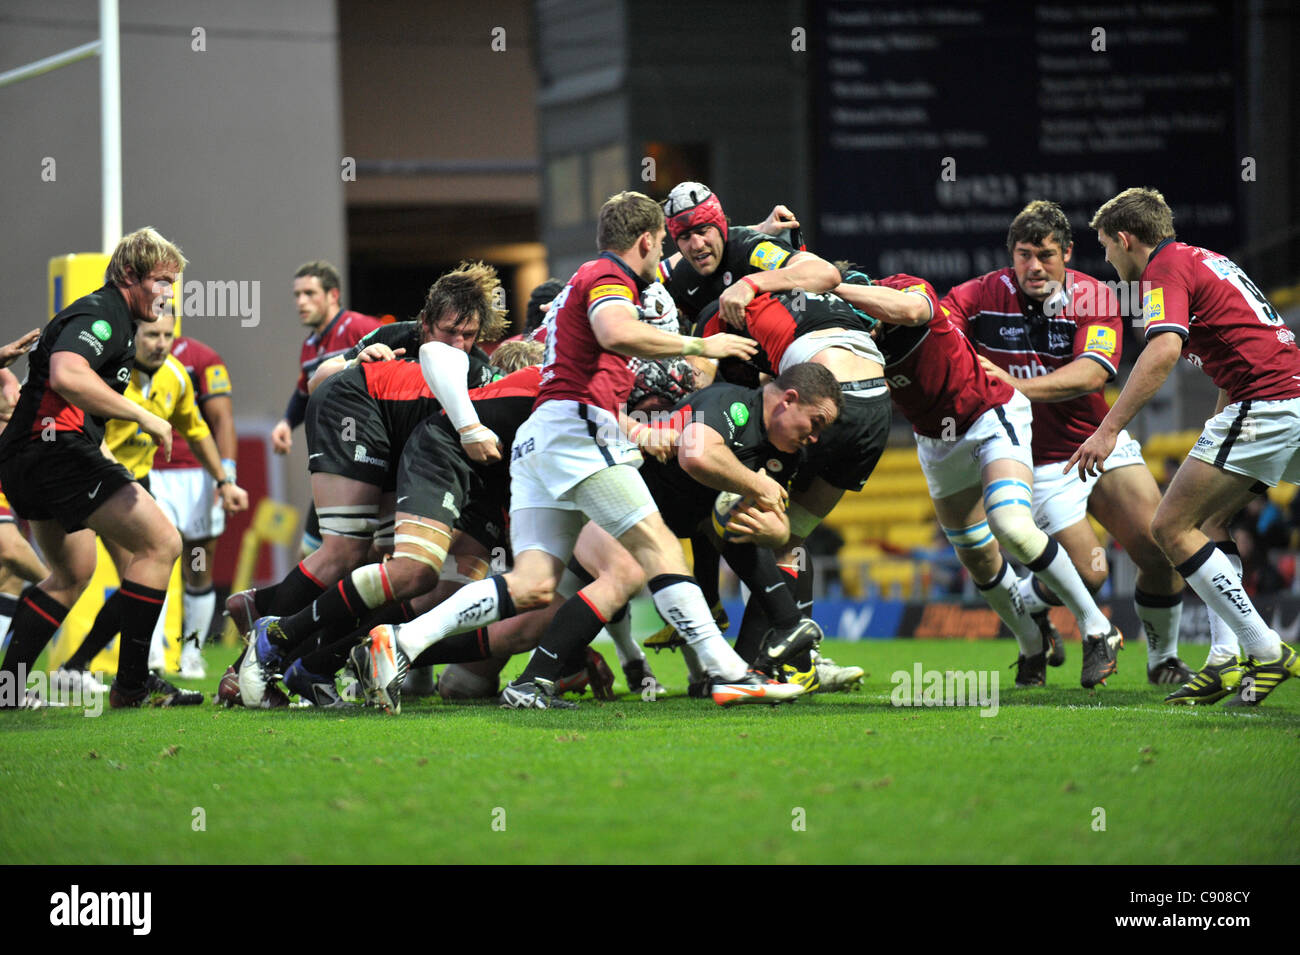 06.11.2011 Watford, England.  Matt Stevens goes over for a try for Saracens during the Aviva Premiership game between Saracens and Sale Sharks. Stock Photo